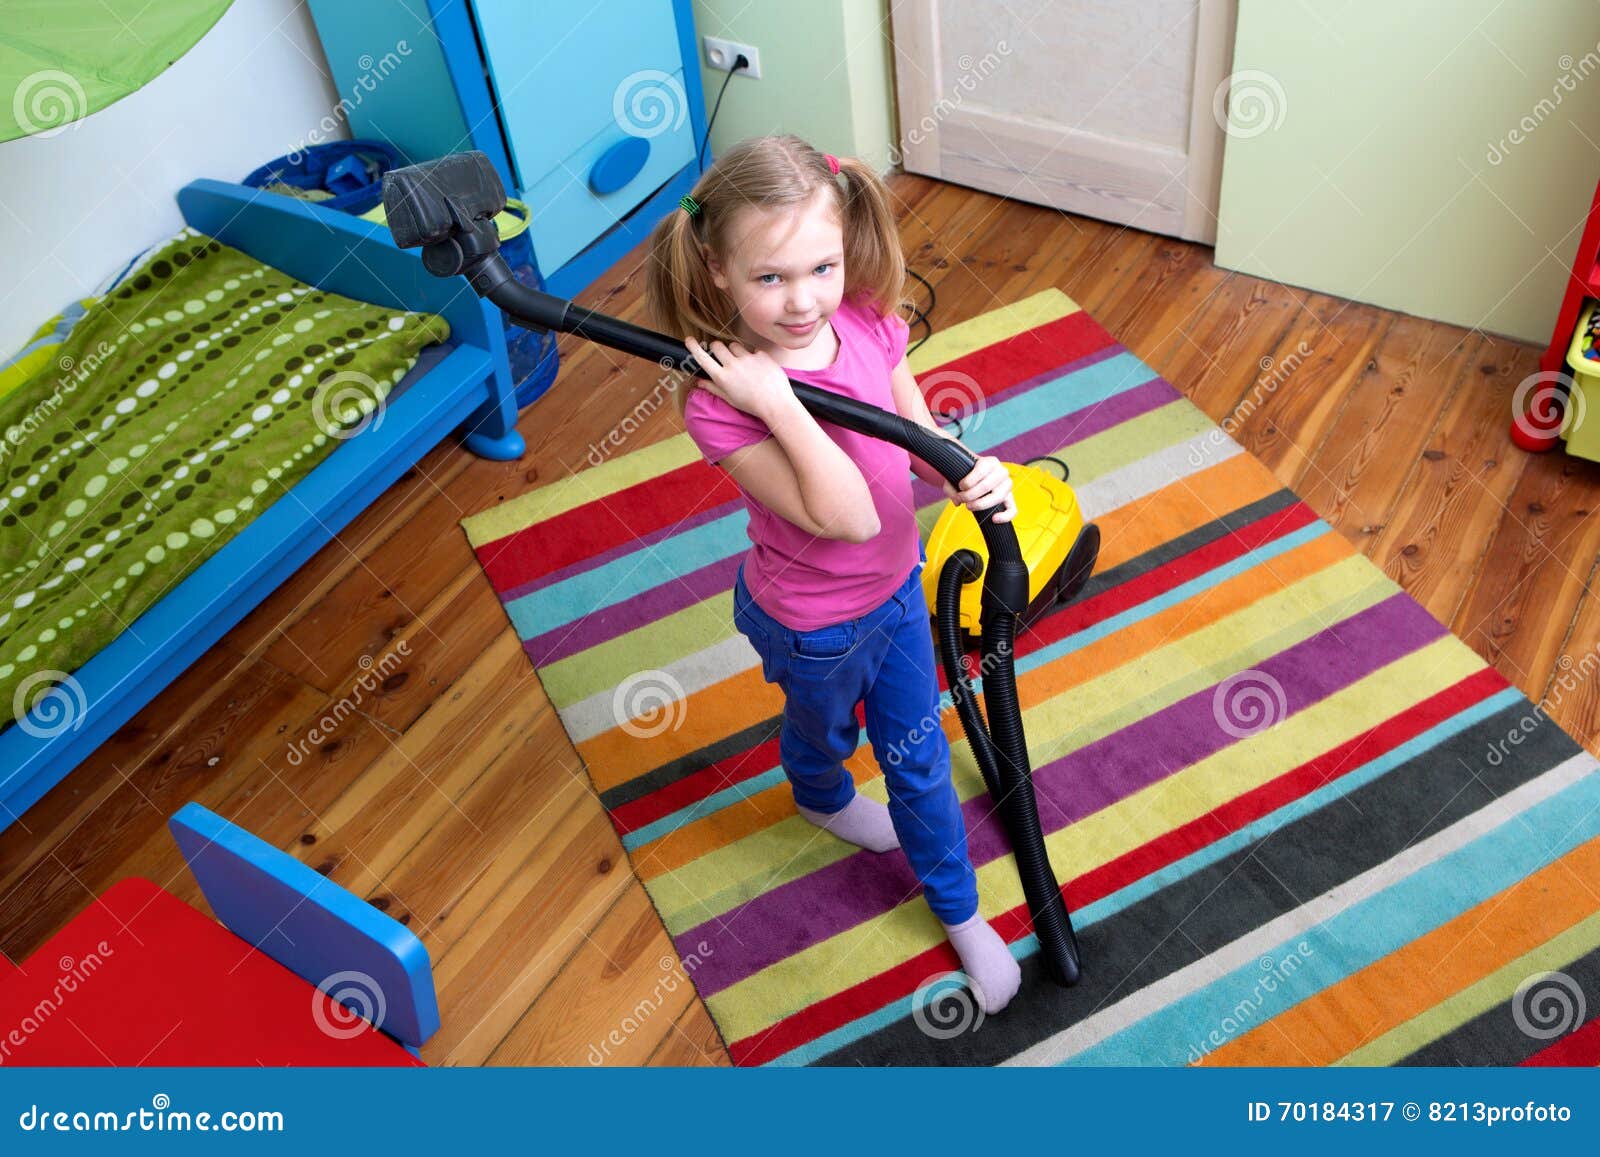 Girl Cleaning Floor With Hoover Stock Image Image Of Cleaning